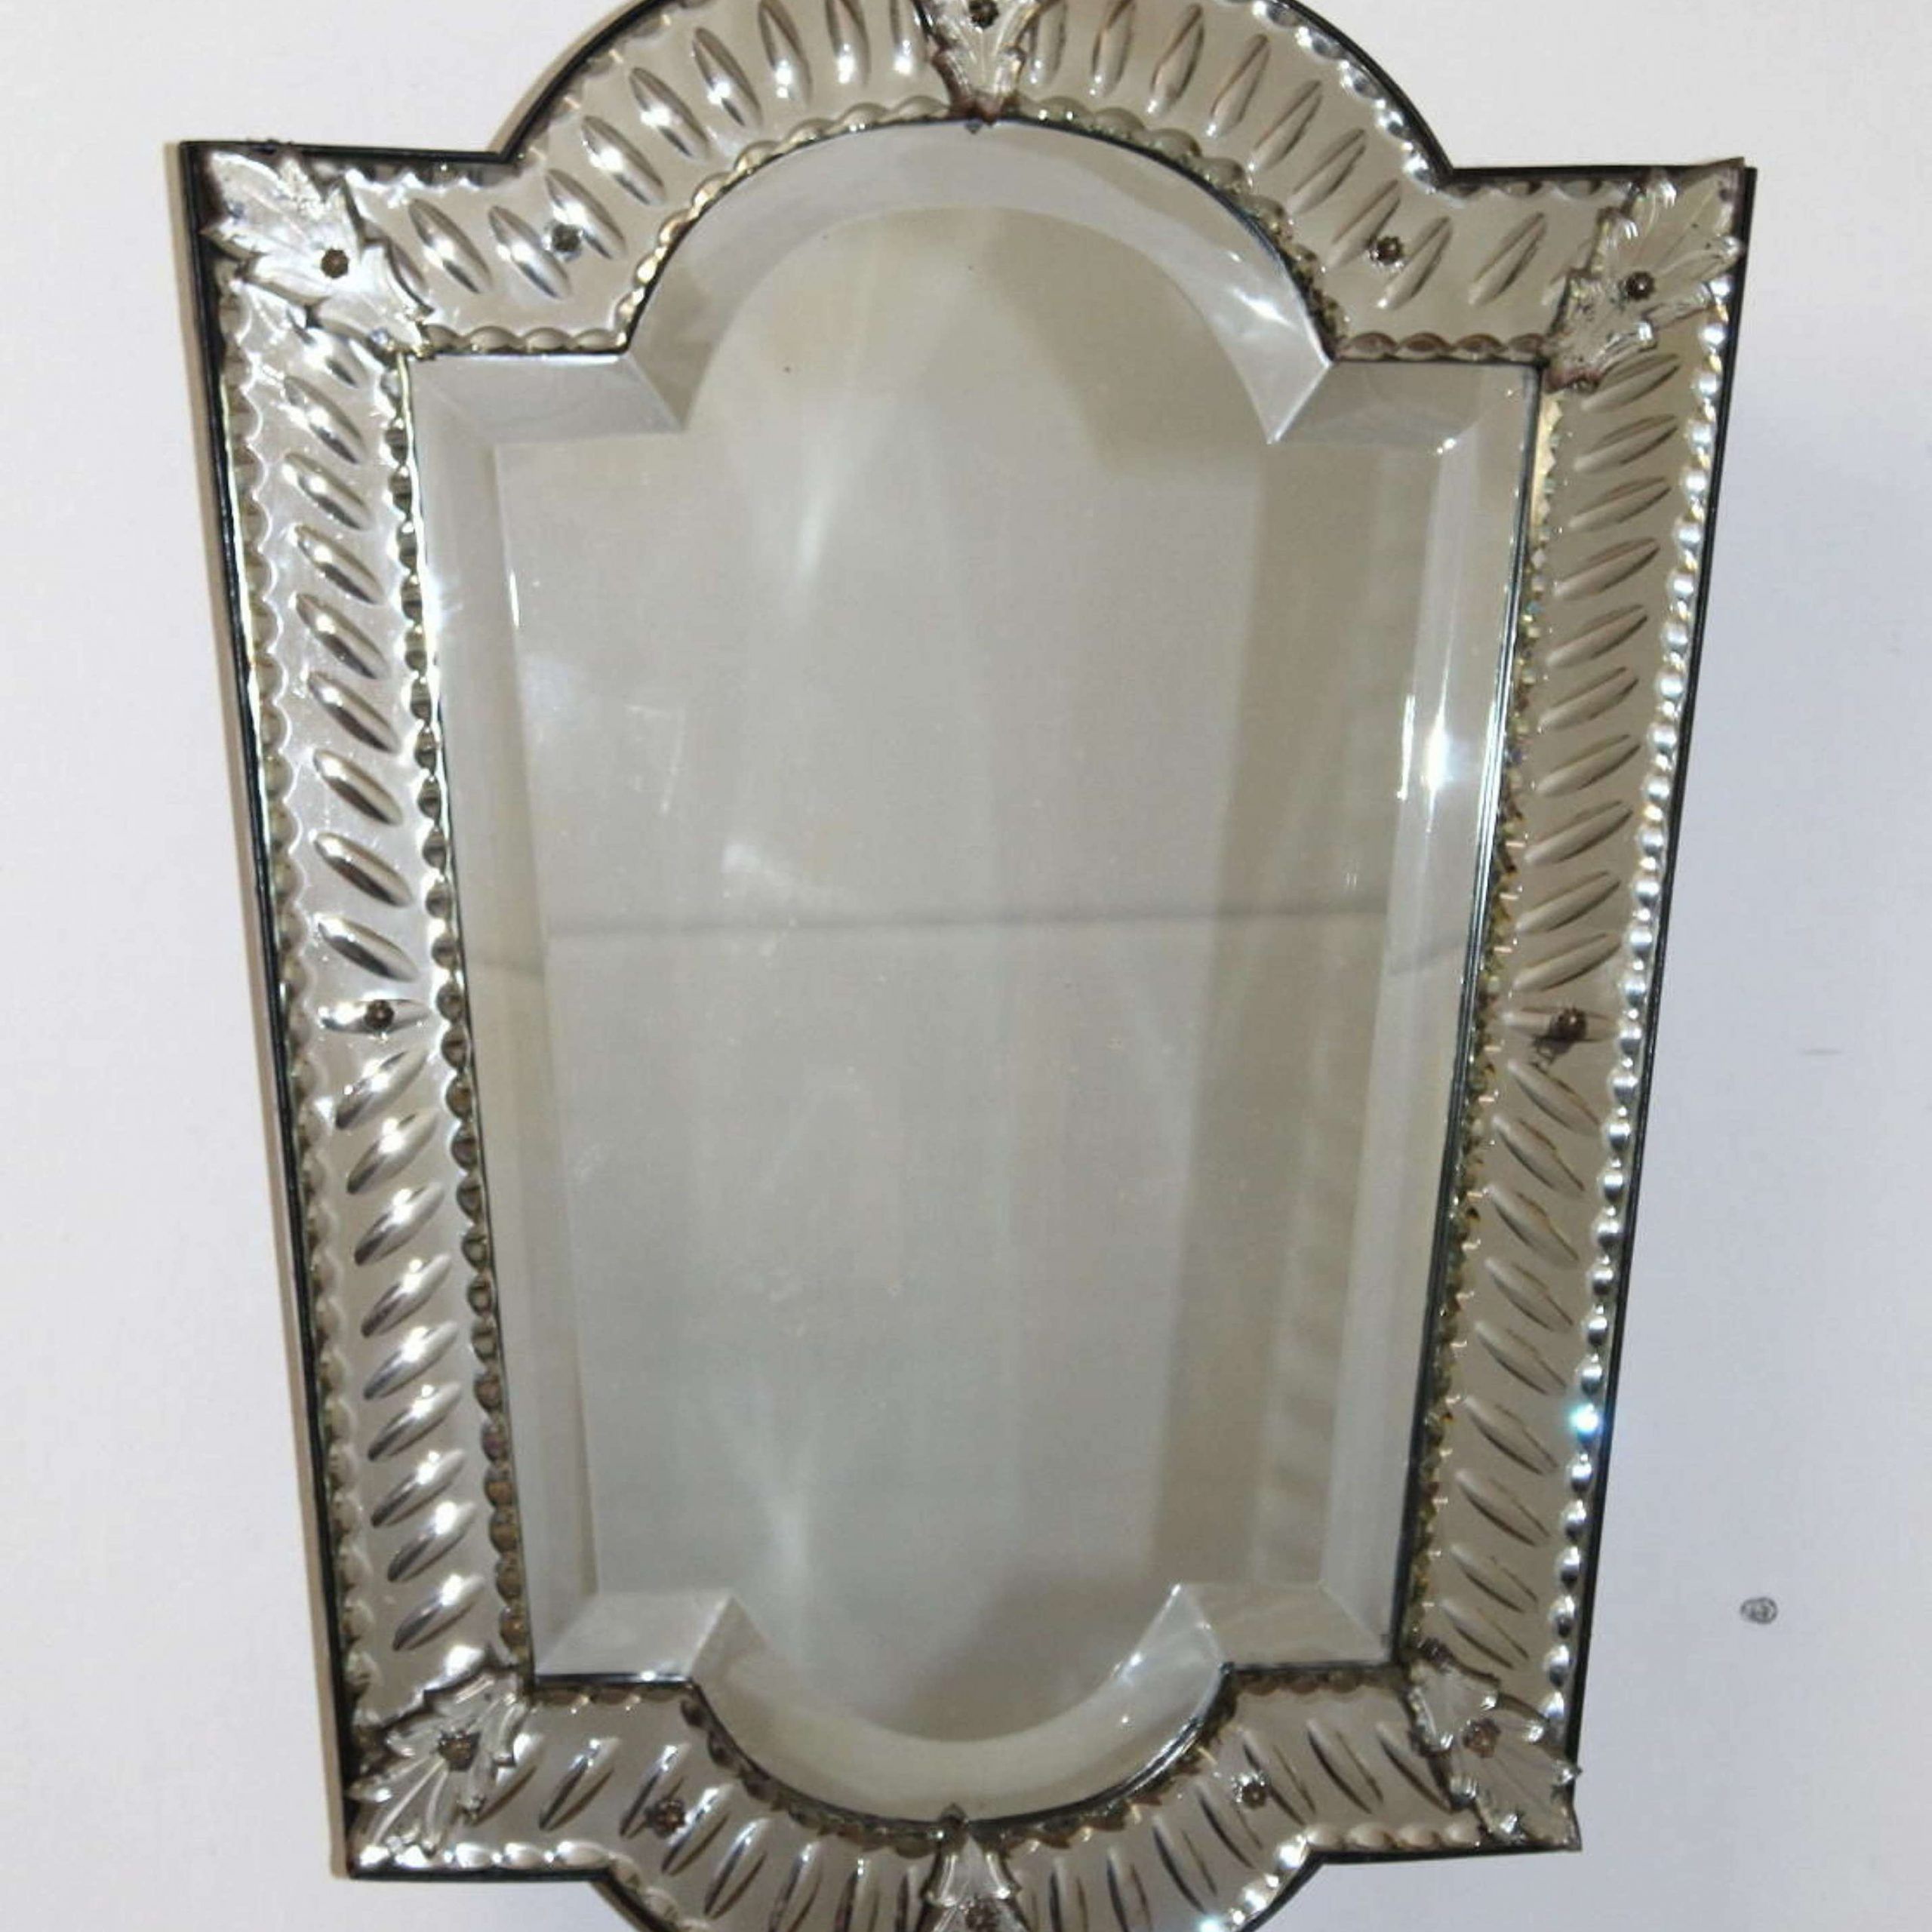 Vintage Venetian Mirror With Tapering Sides In Antique Venetian Mirrors With Antique Gold Cut Edge Wall Mirrors (View 5 of 15)